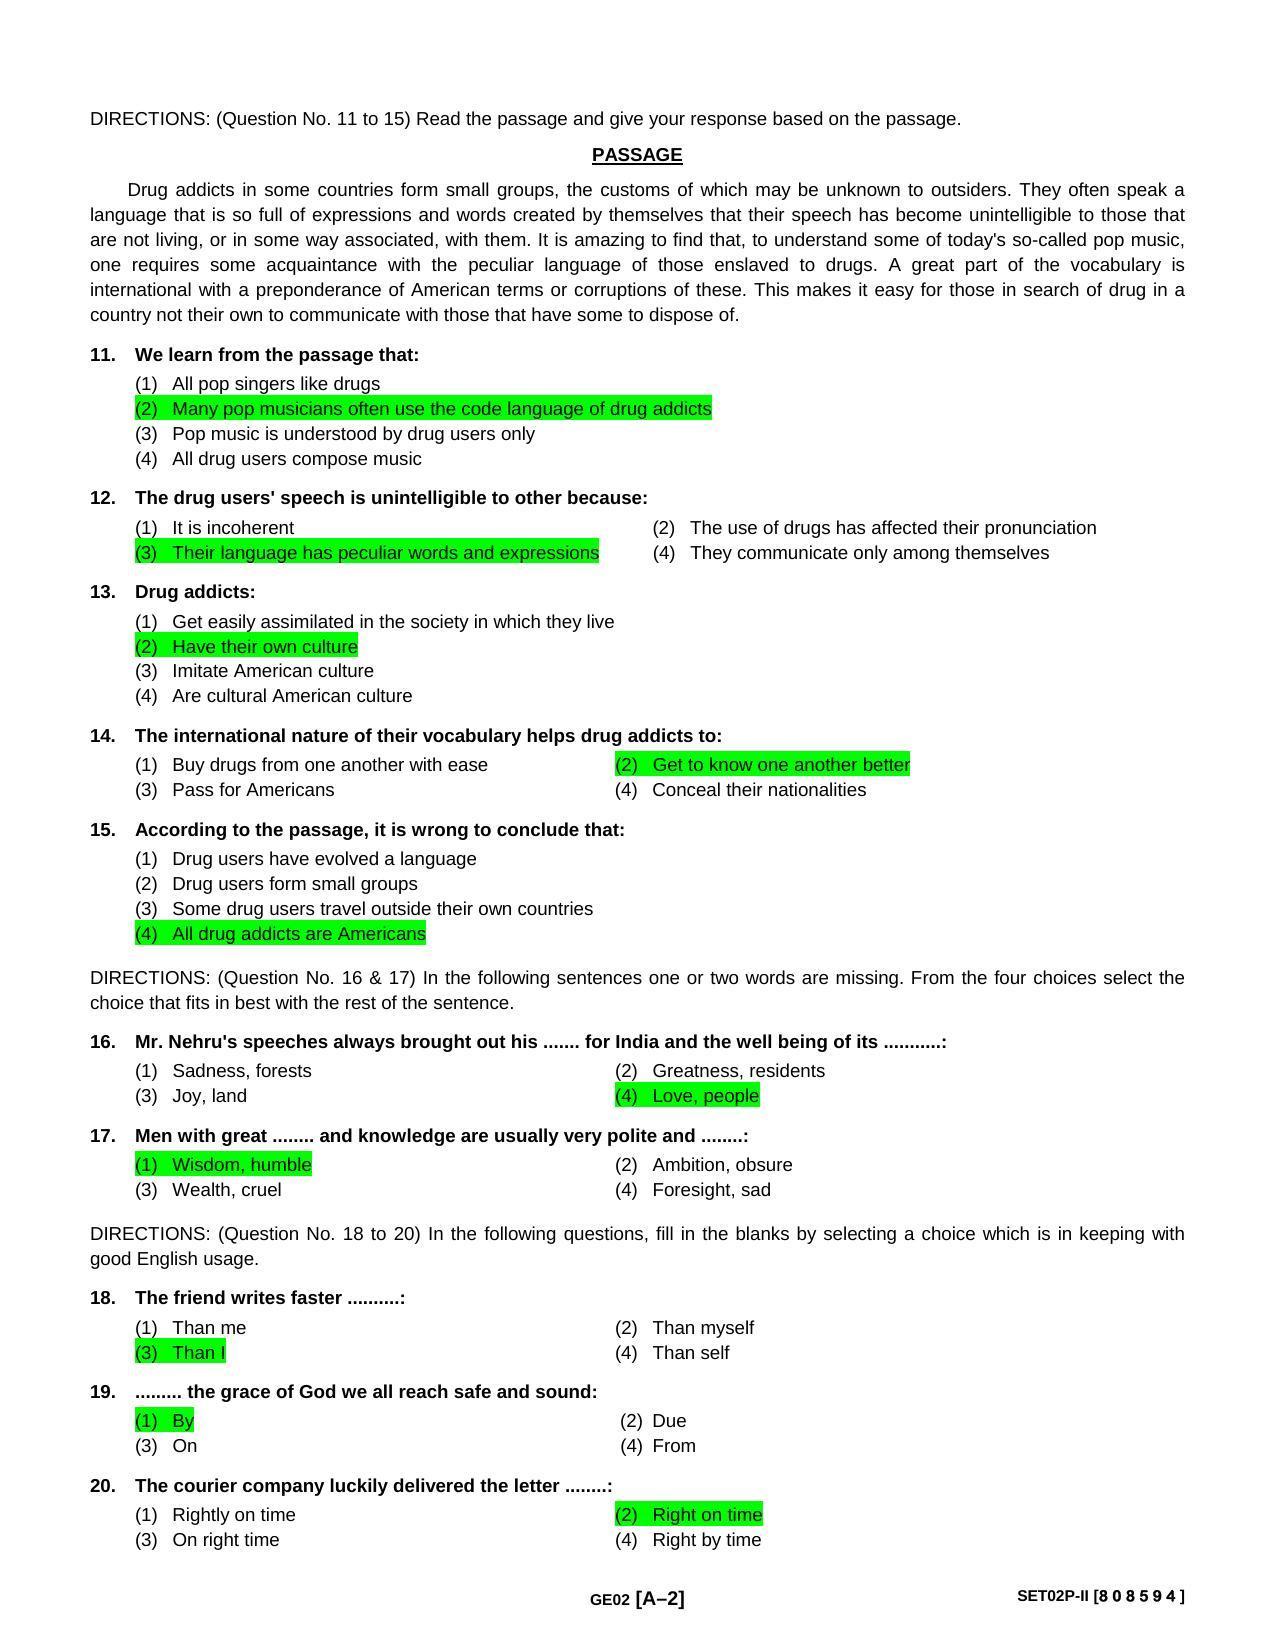 Punjab B.Ed Question Papers for General English - Page 2